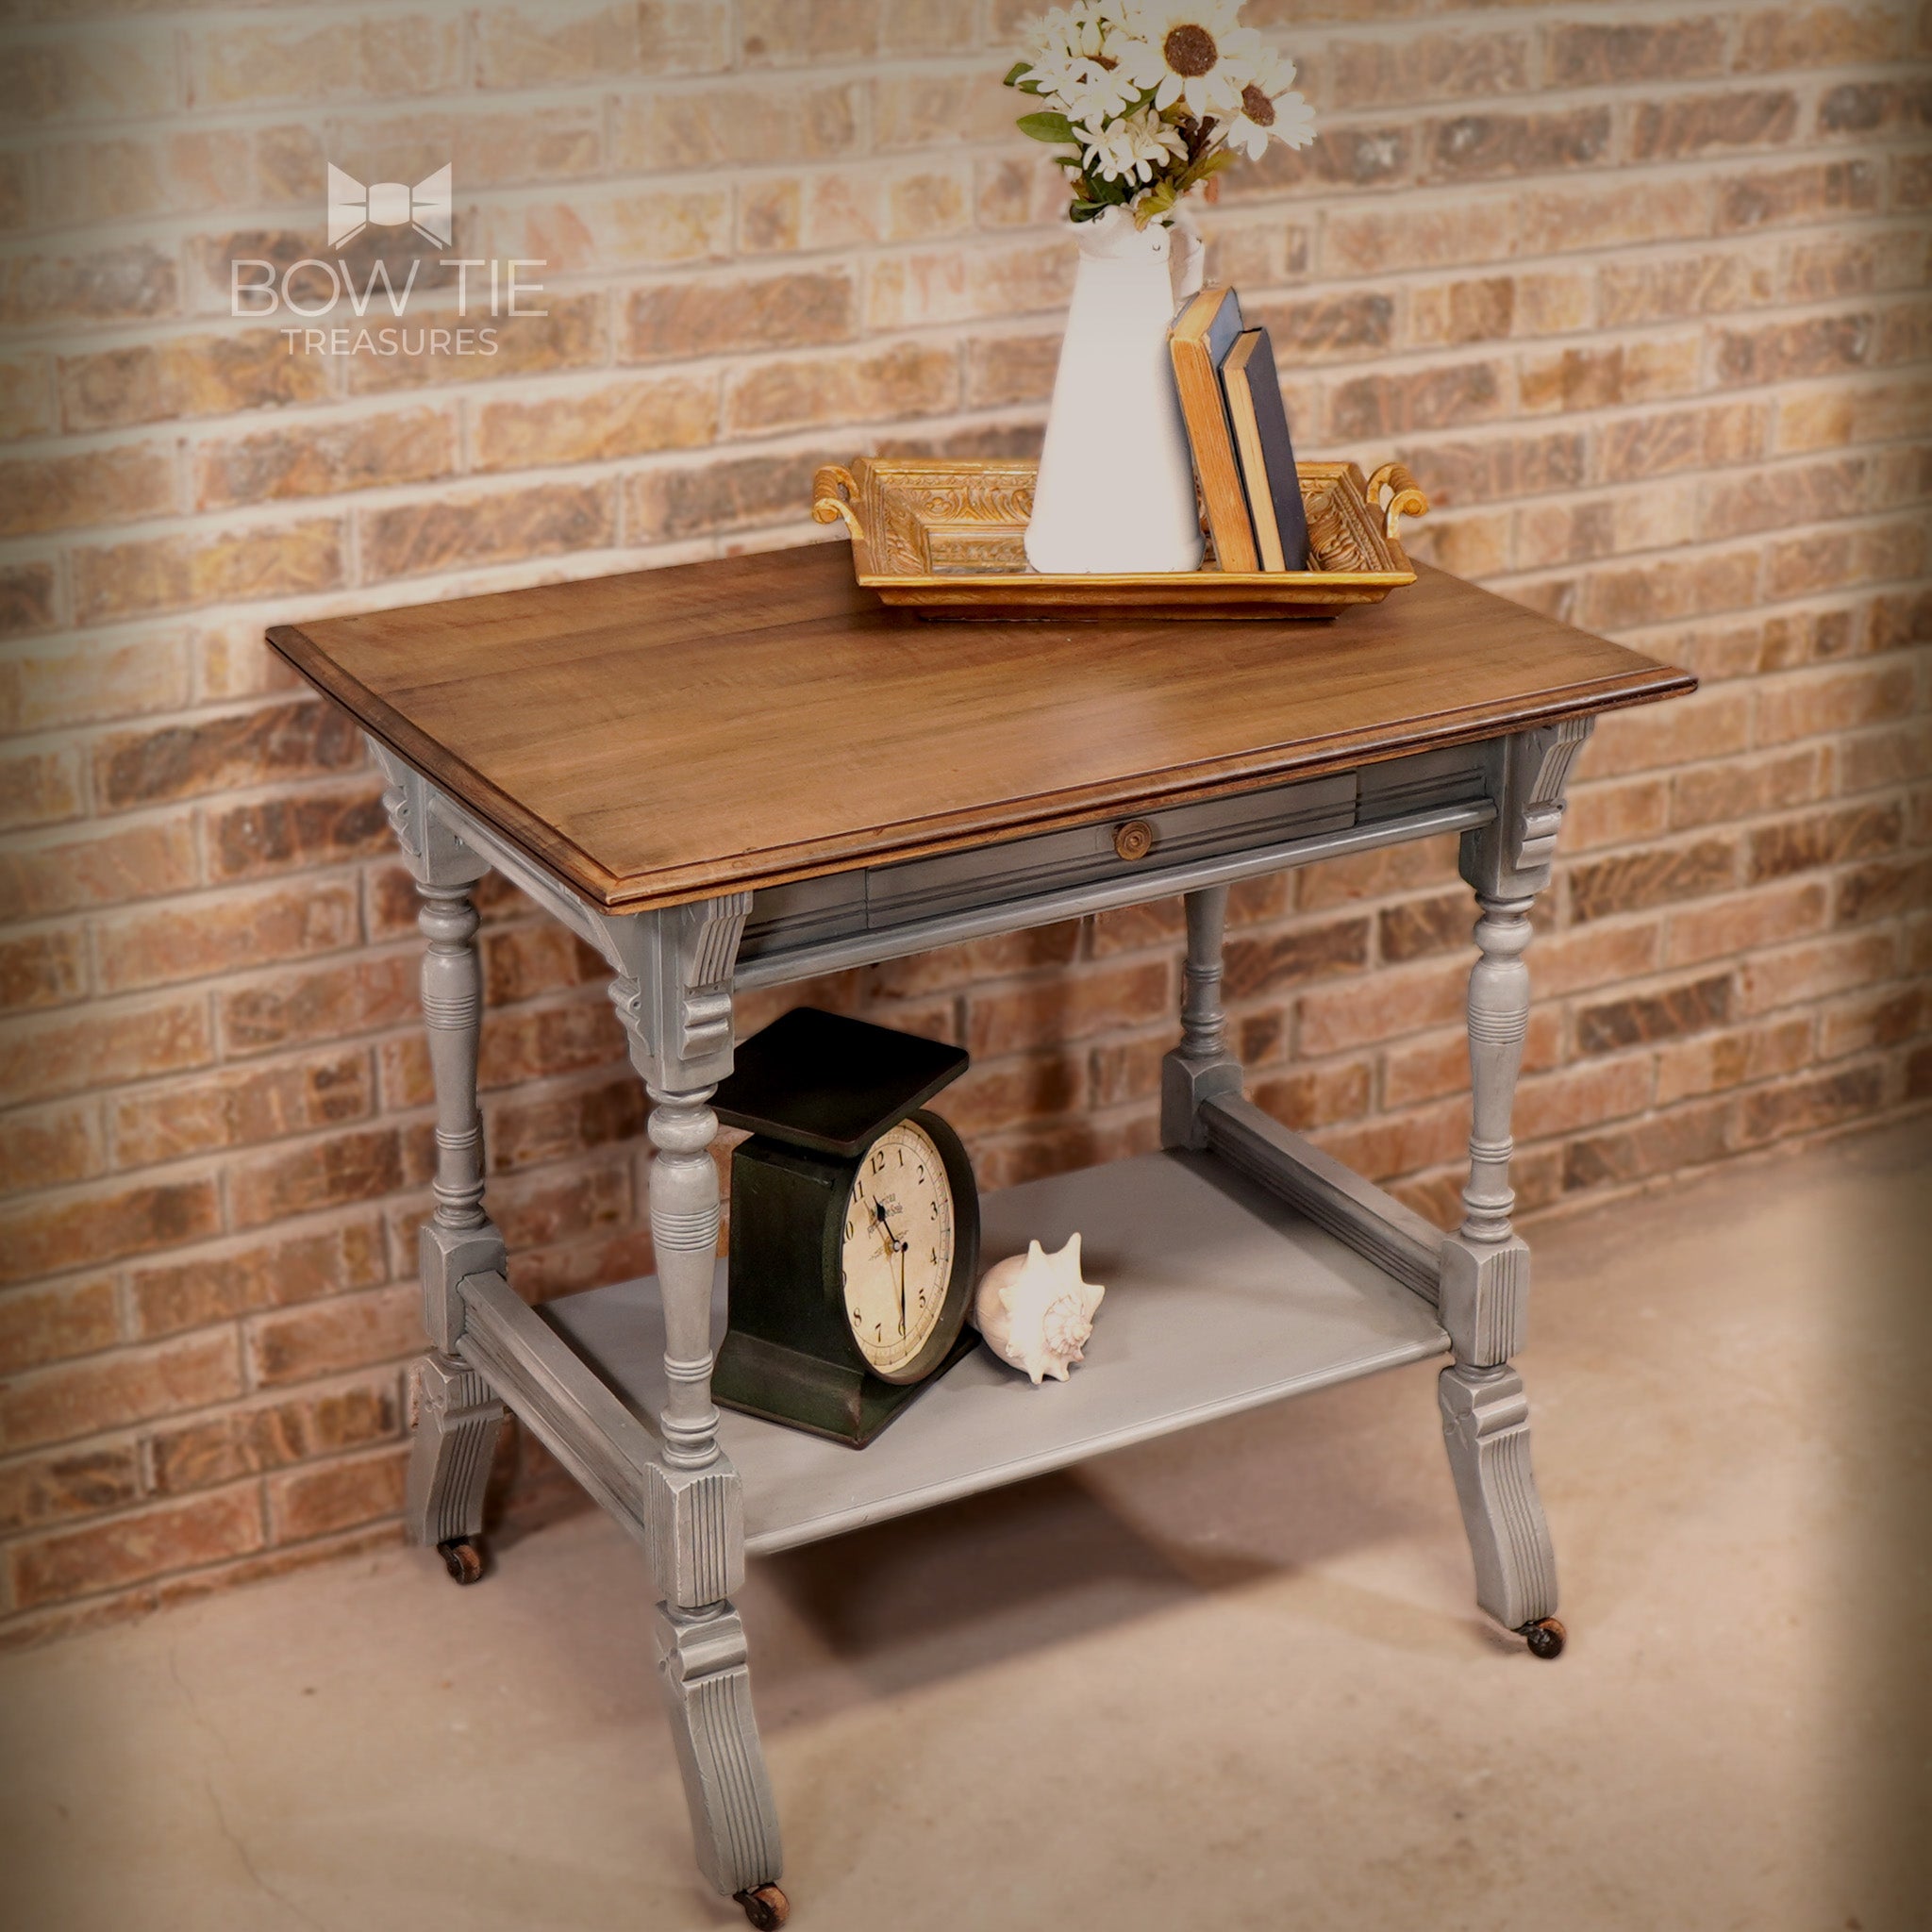 A vintage end table refurbished by Bow Tie Treasures is painted in Dixie Belle's Sawmill Gravy chalk mineral paint and has a natural wood top.